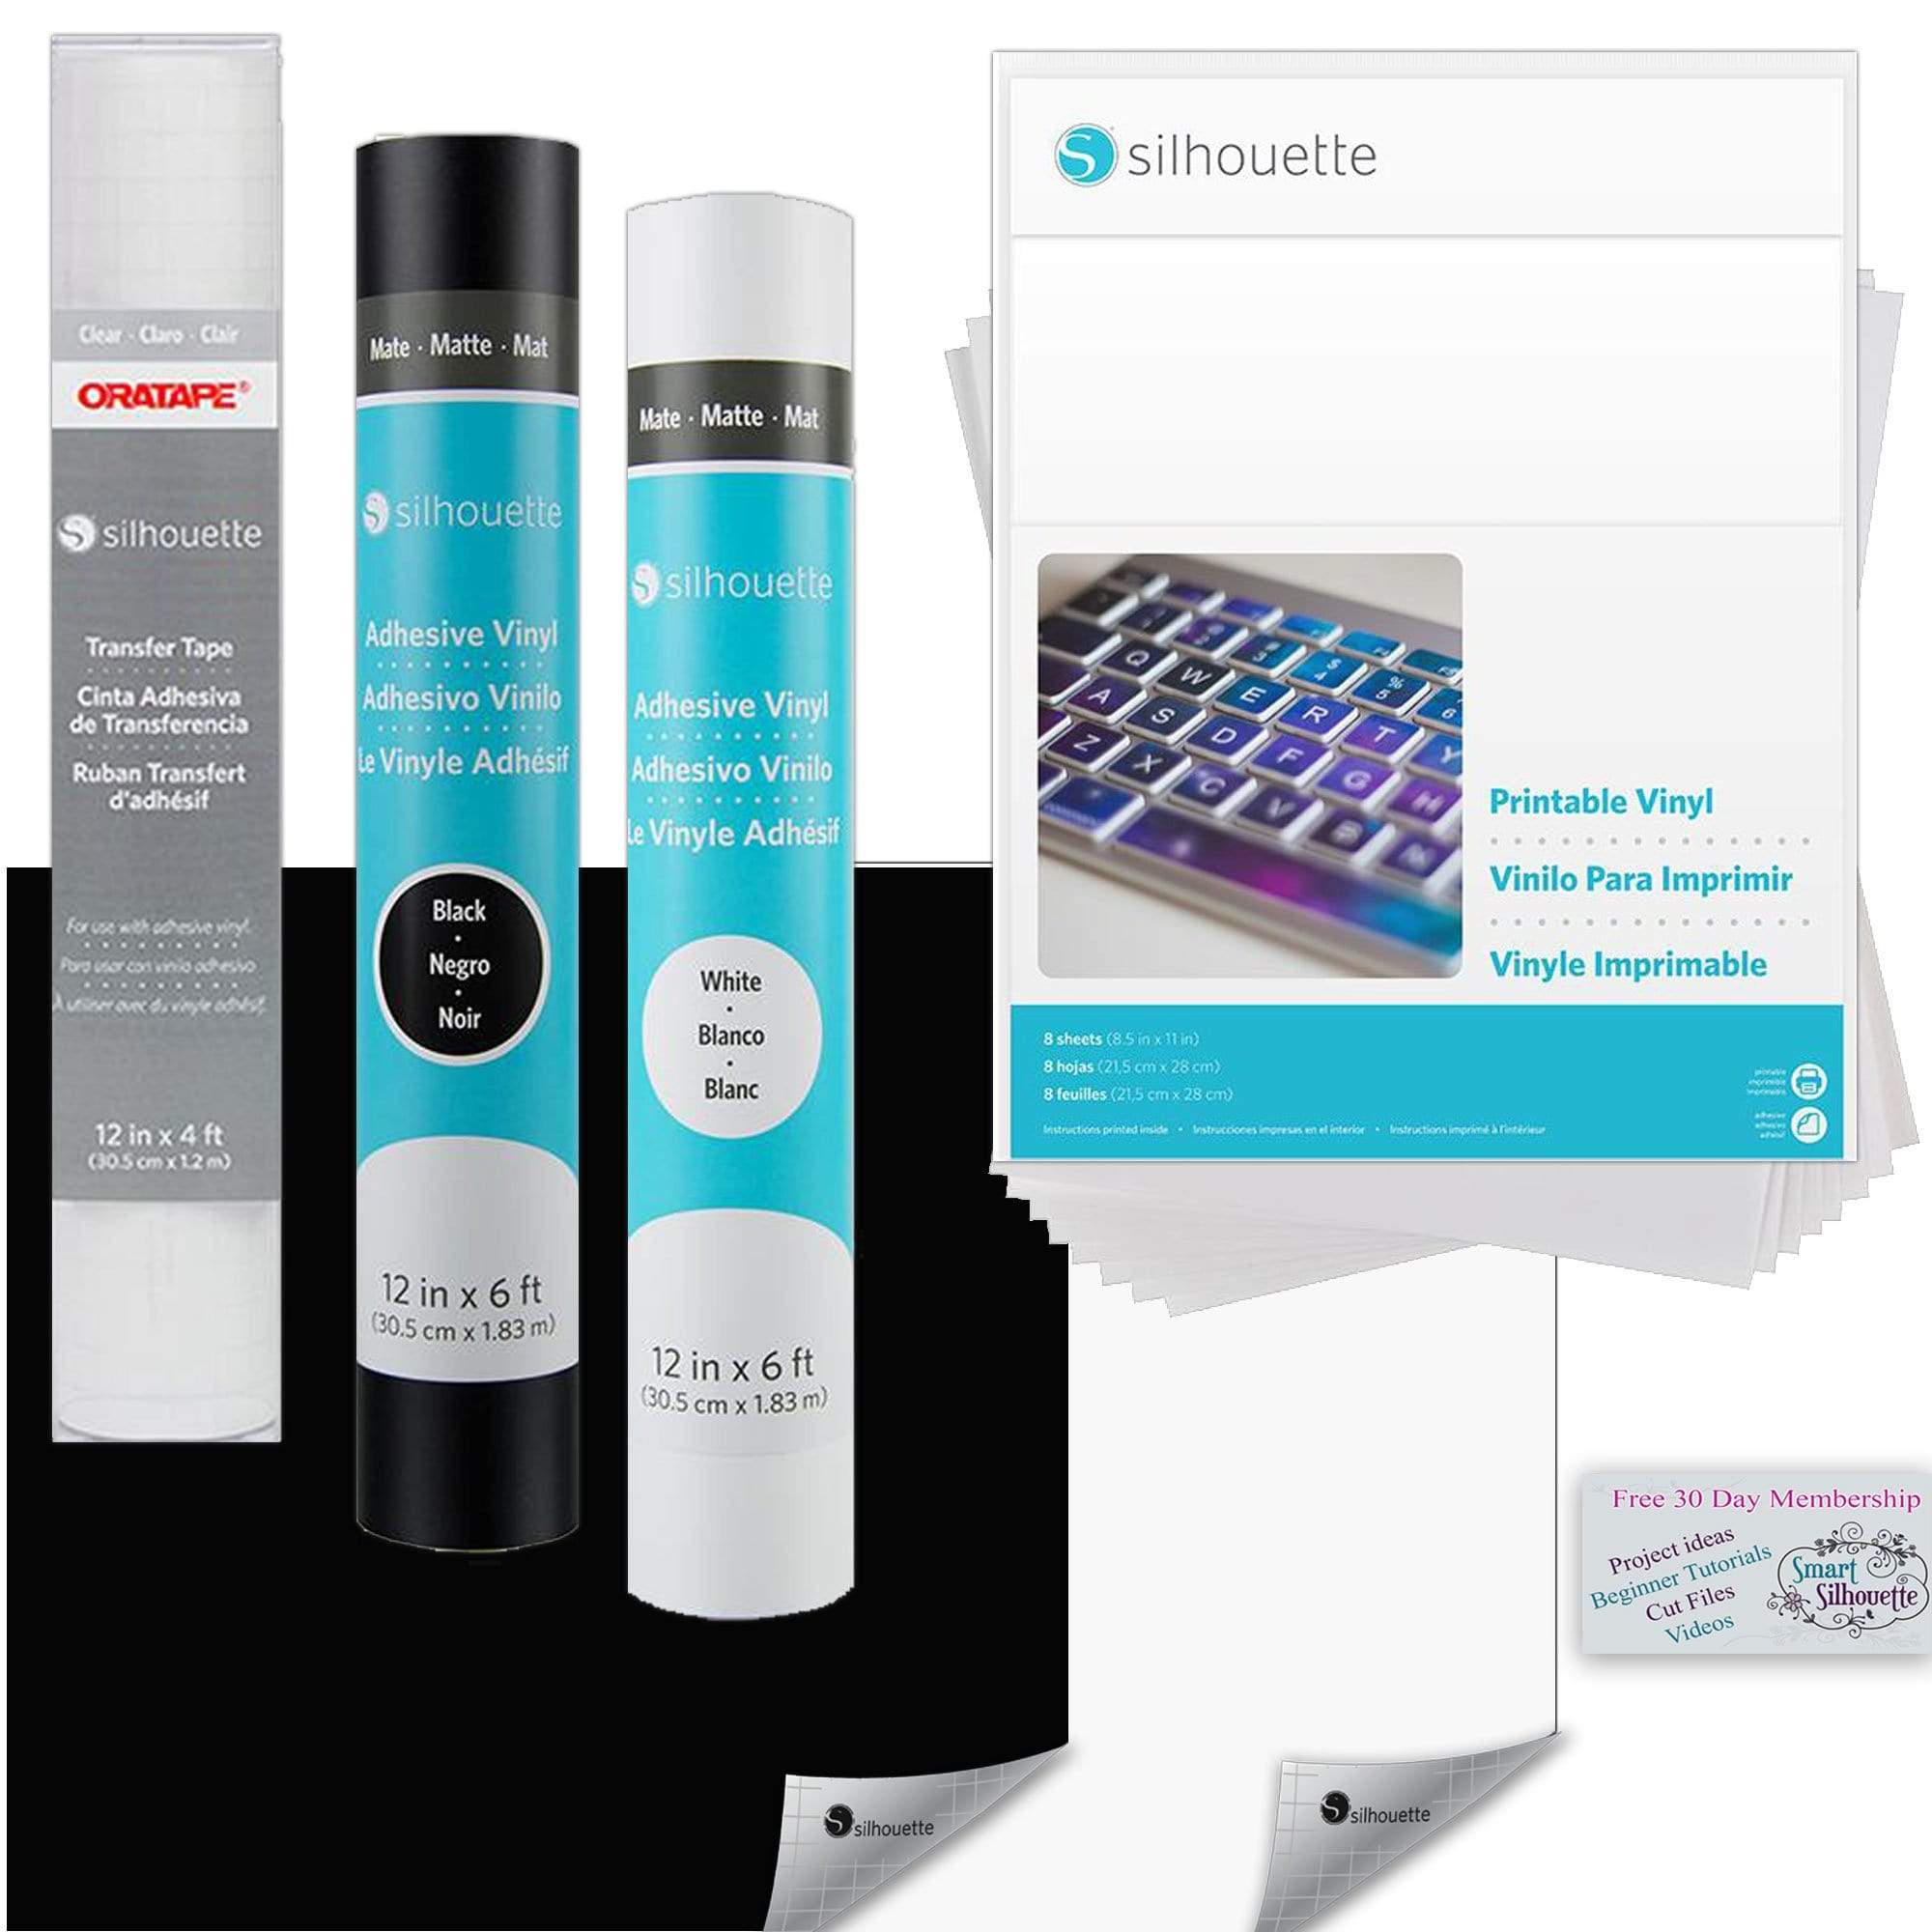 Silhouette America Vinyls Silhouette Classic Vinyl Bundle includes 2 Rolls of Vinyl, 8 sheets of Printable Vinyl, 1 Roll of Transfer Tape, and a 30 Day Trial to Smart-Silhouette